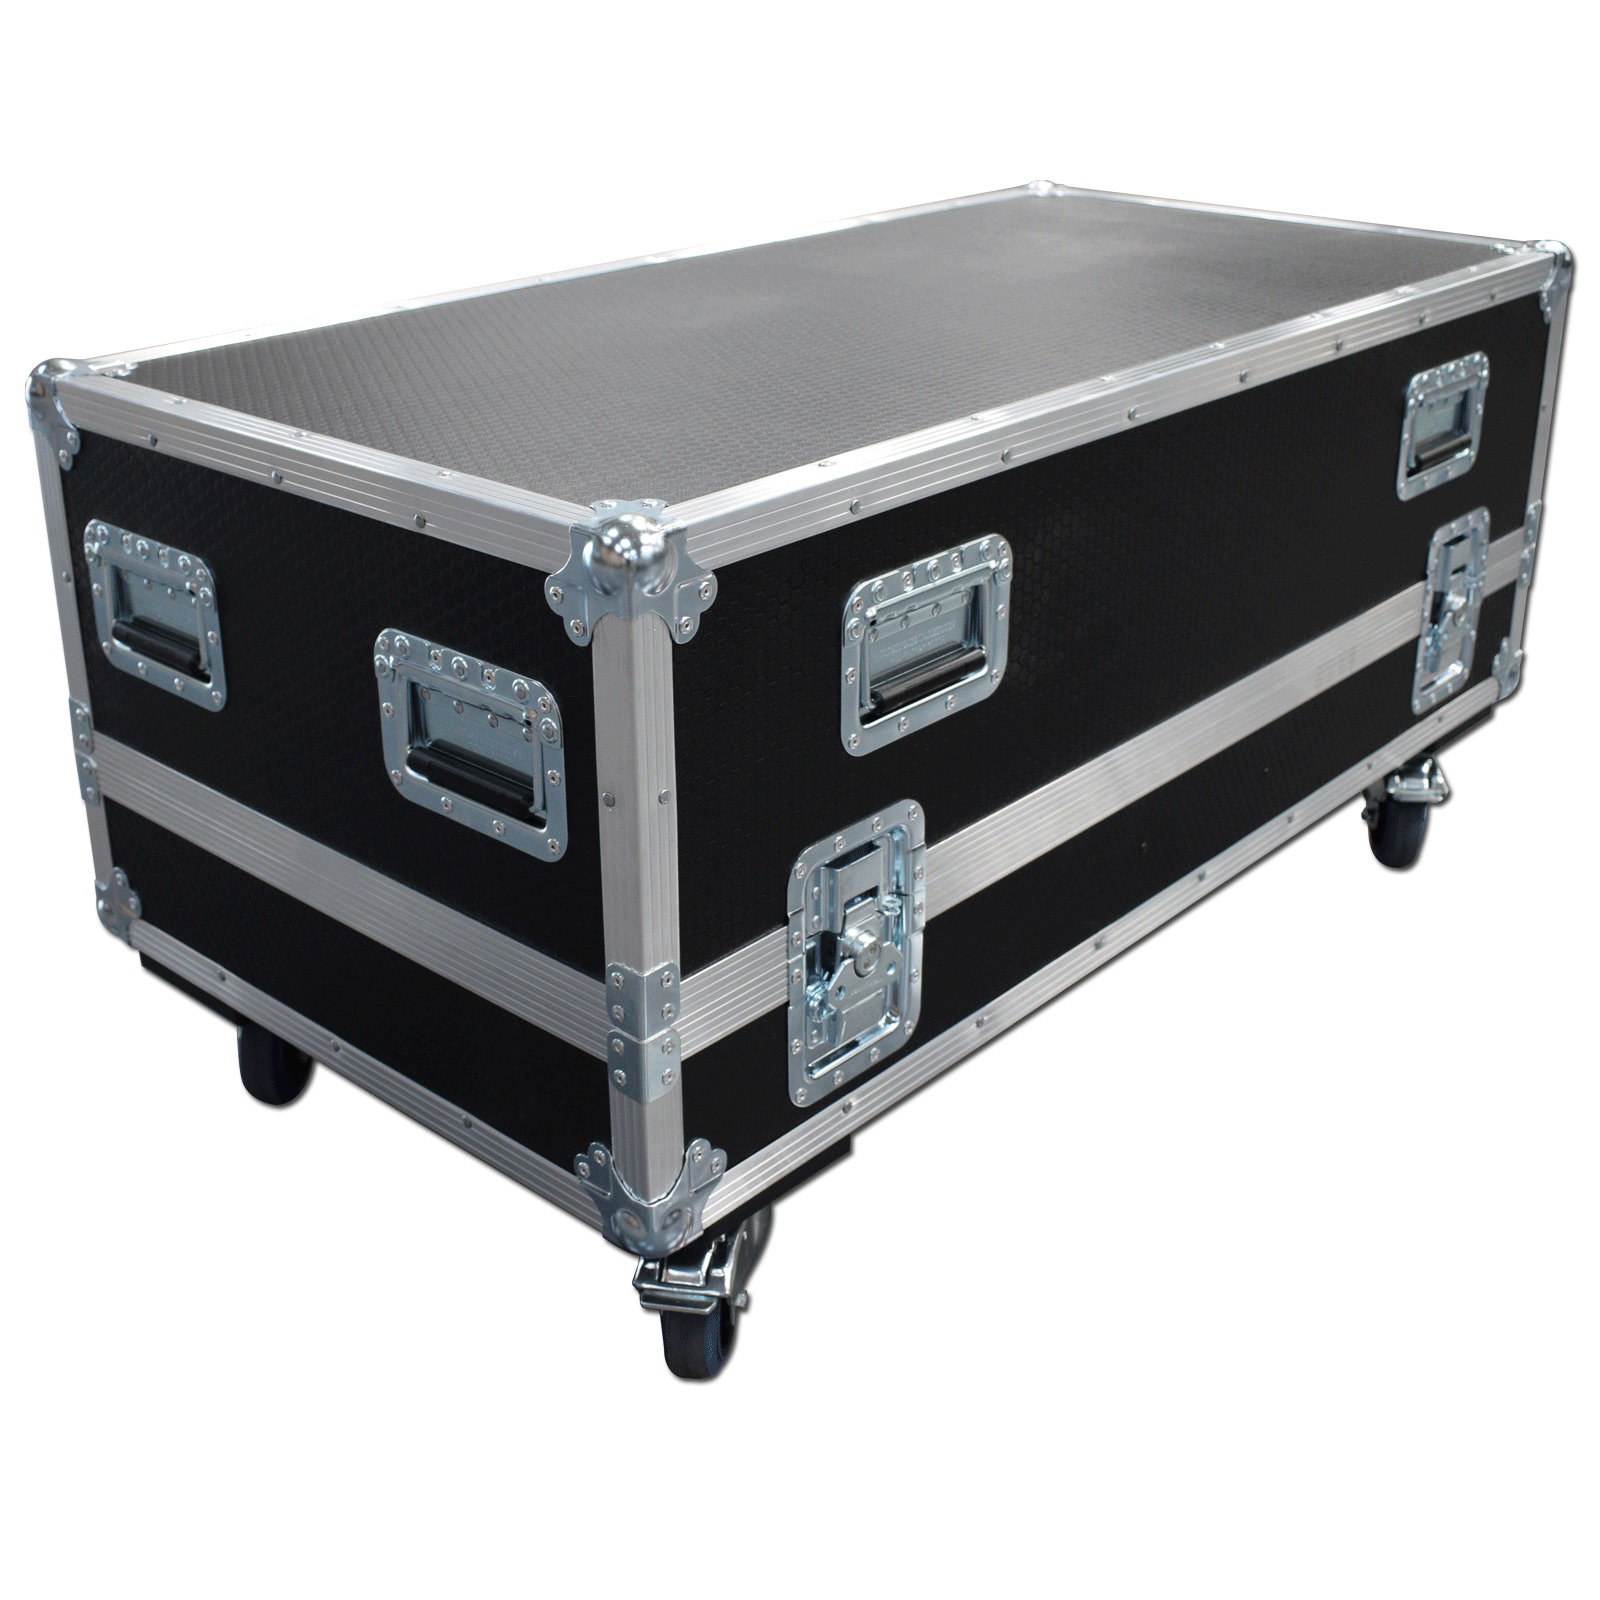 Twin Speaker Flightcase for Funktion 1 Resolution 5 Skeletal With 150mm Storage Compartment 